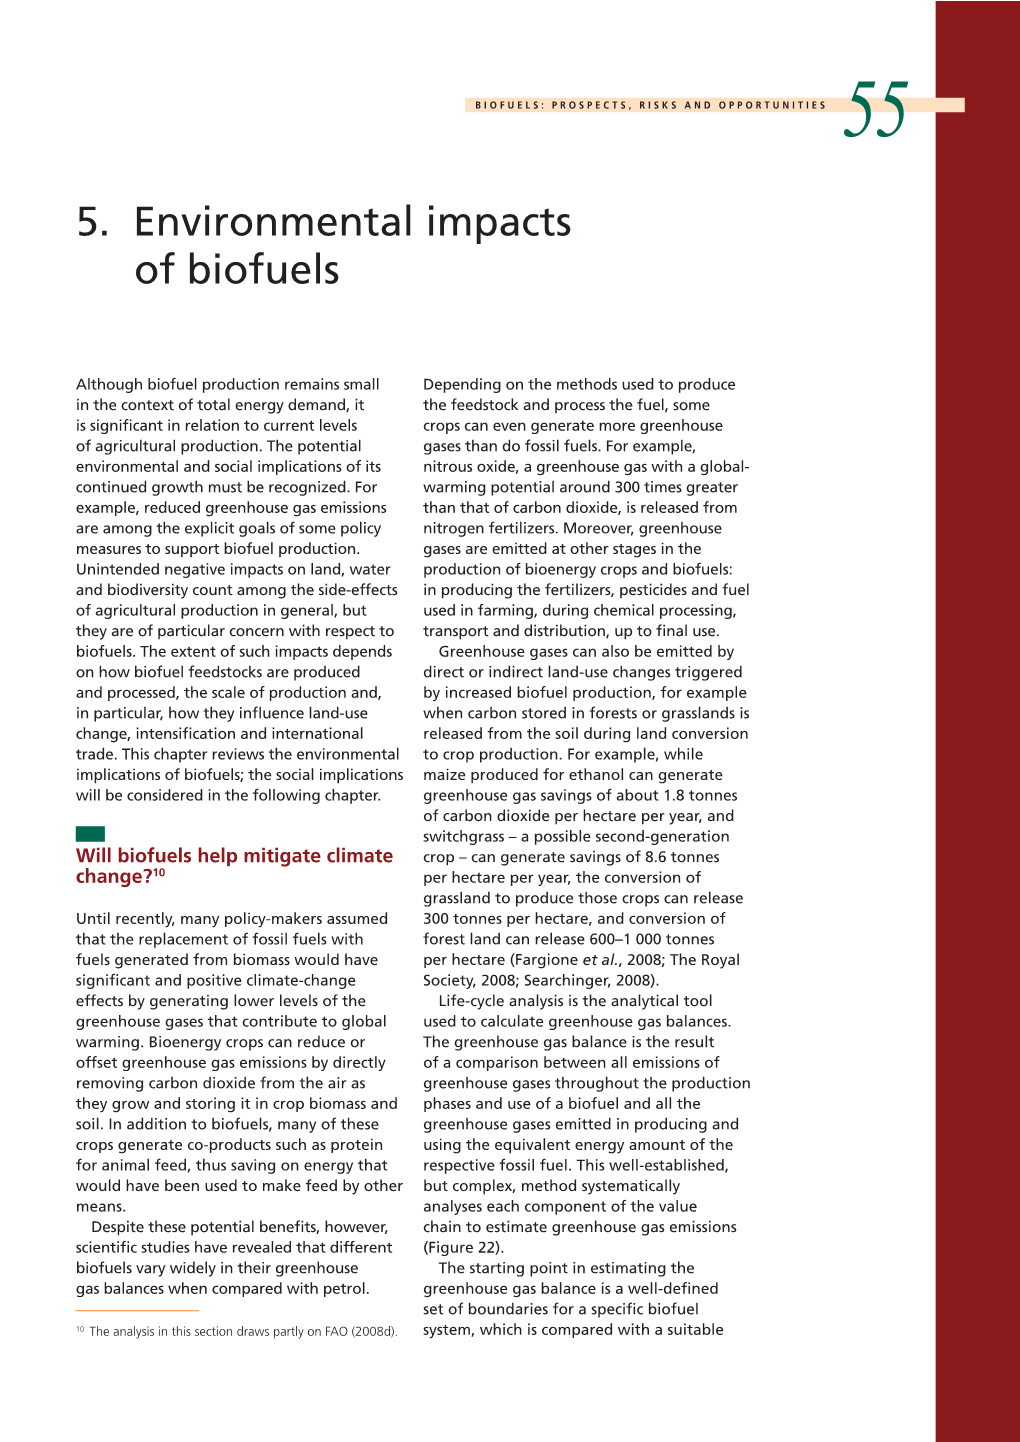 5. Environmental Impacts of Biofuels